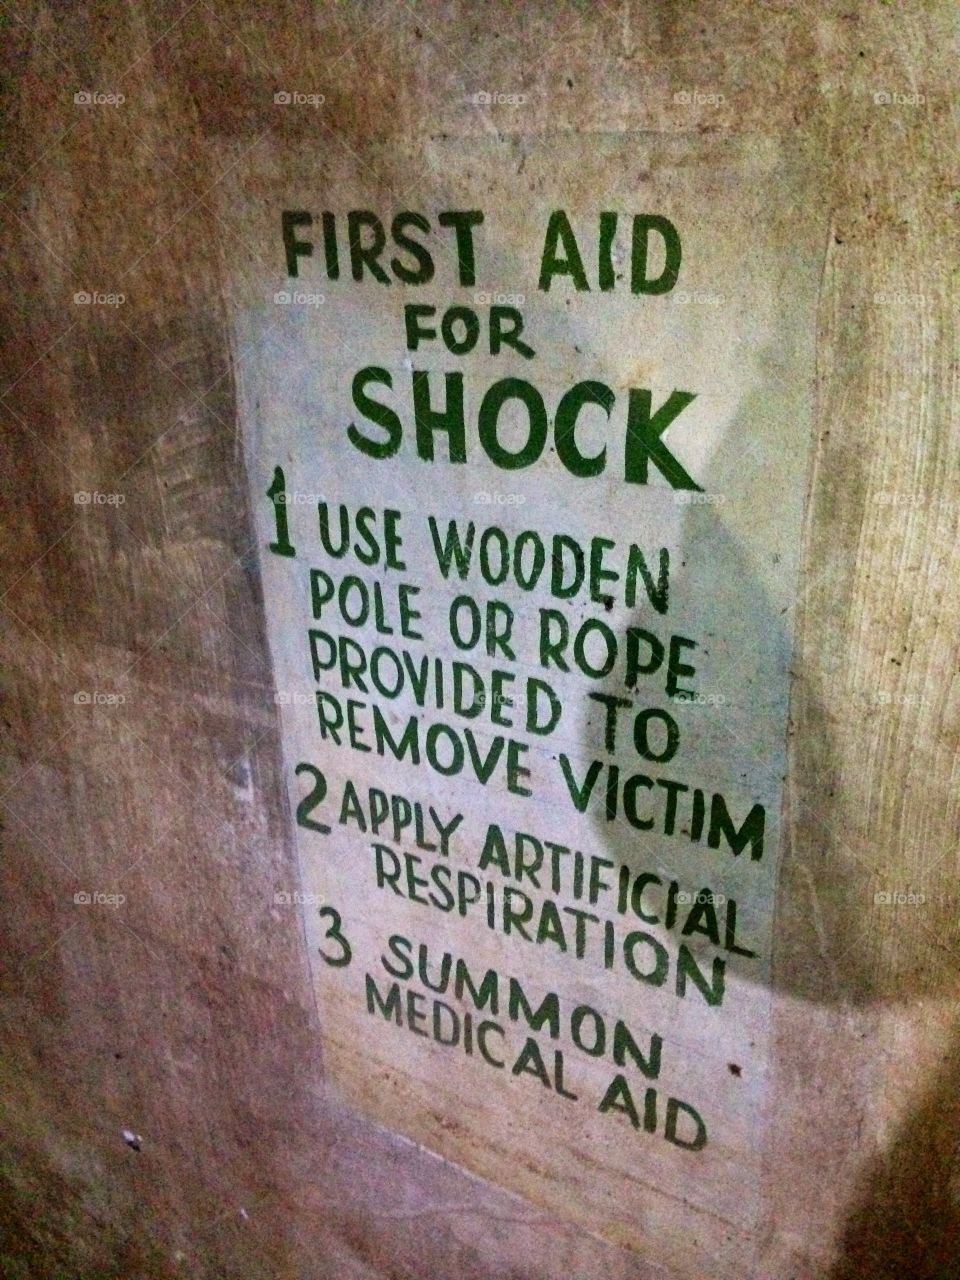 Warning sign I found while in an old abandoned rocket silo. 